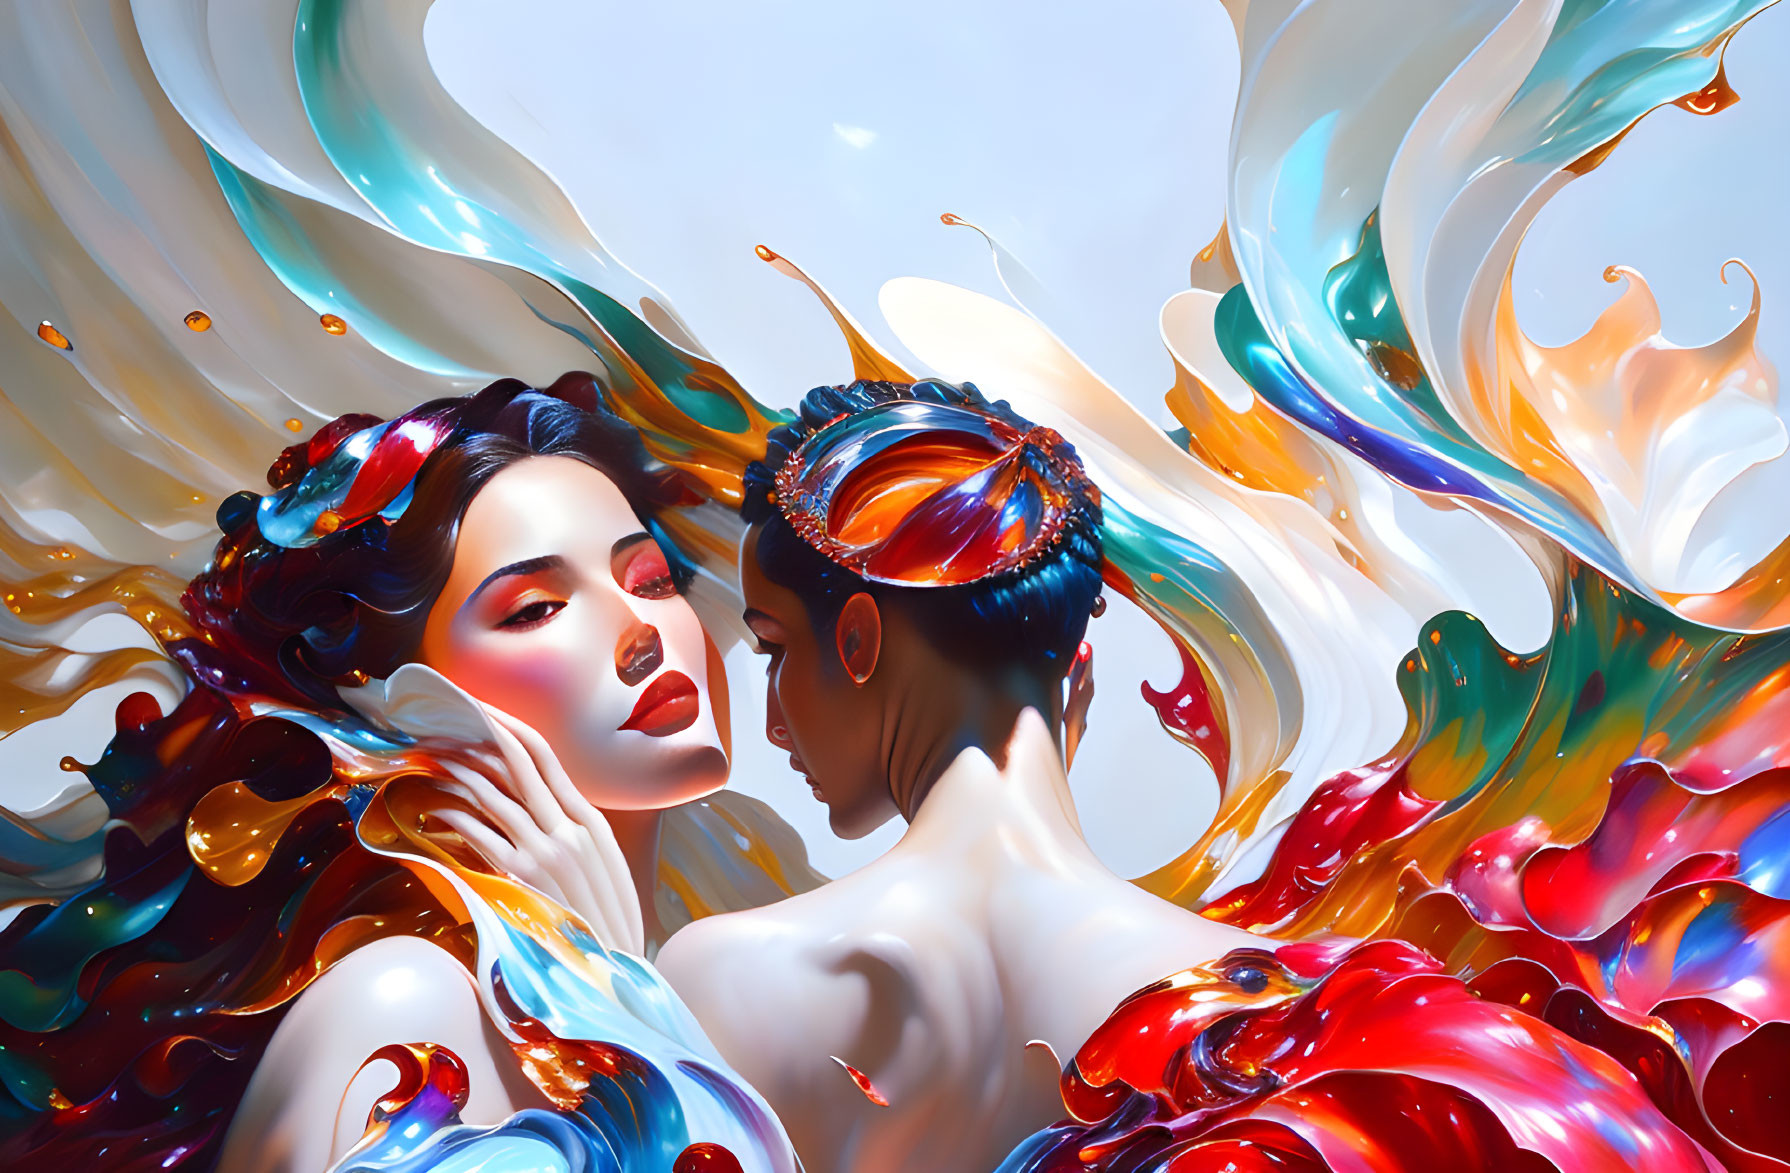 Vibrant digital art: two figures with colorful, flowing hair